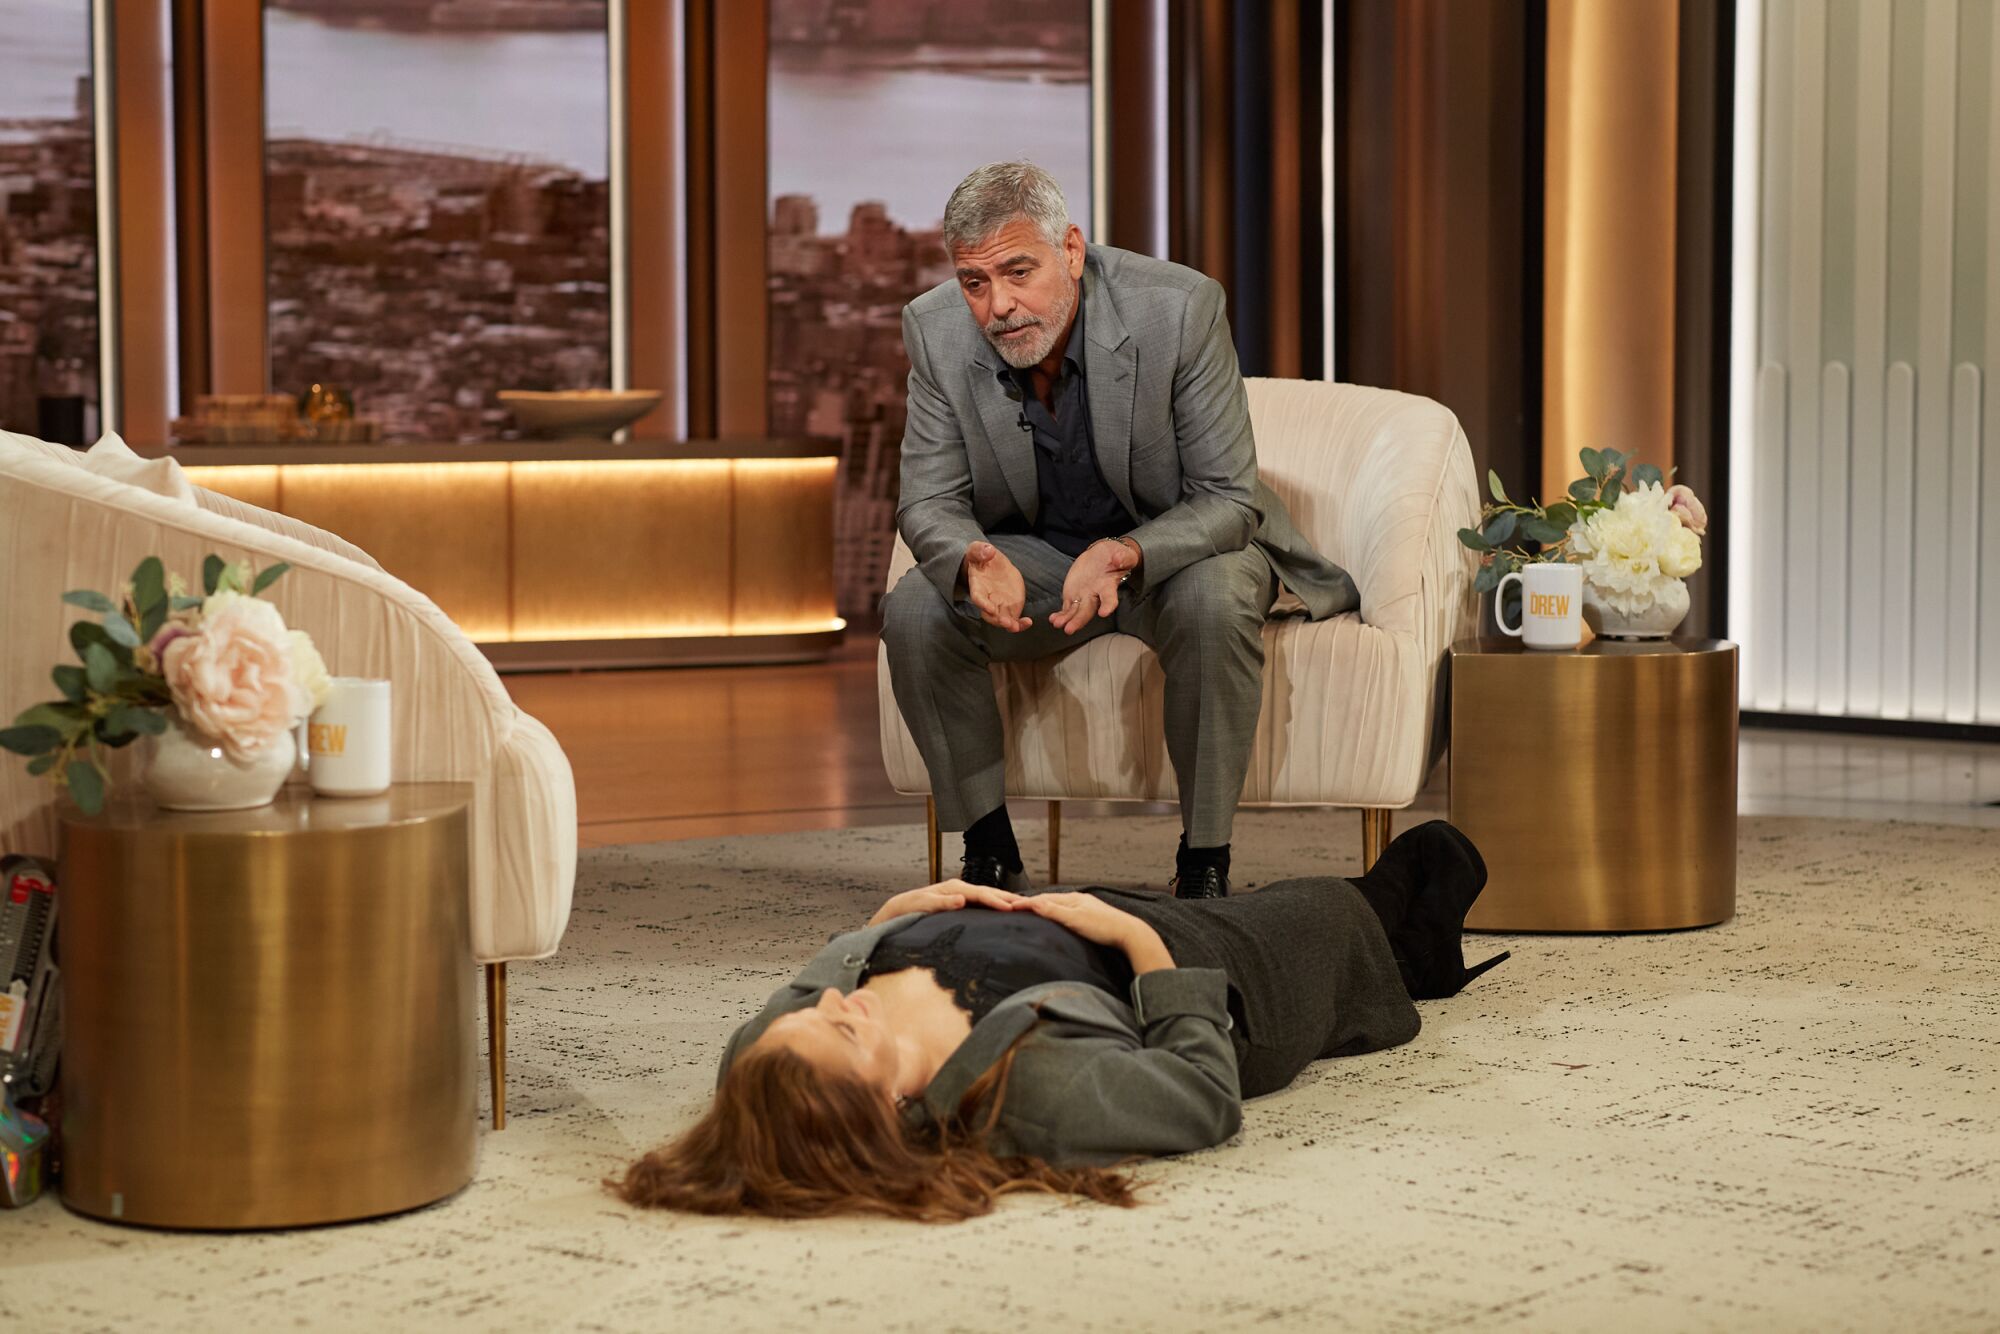 George Clooney acts as Barrymore's therapist while she lies on the floor of her set.